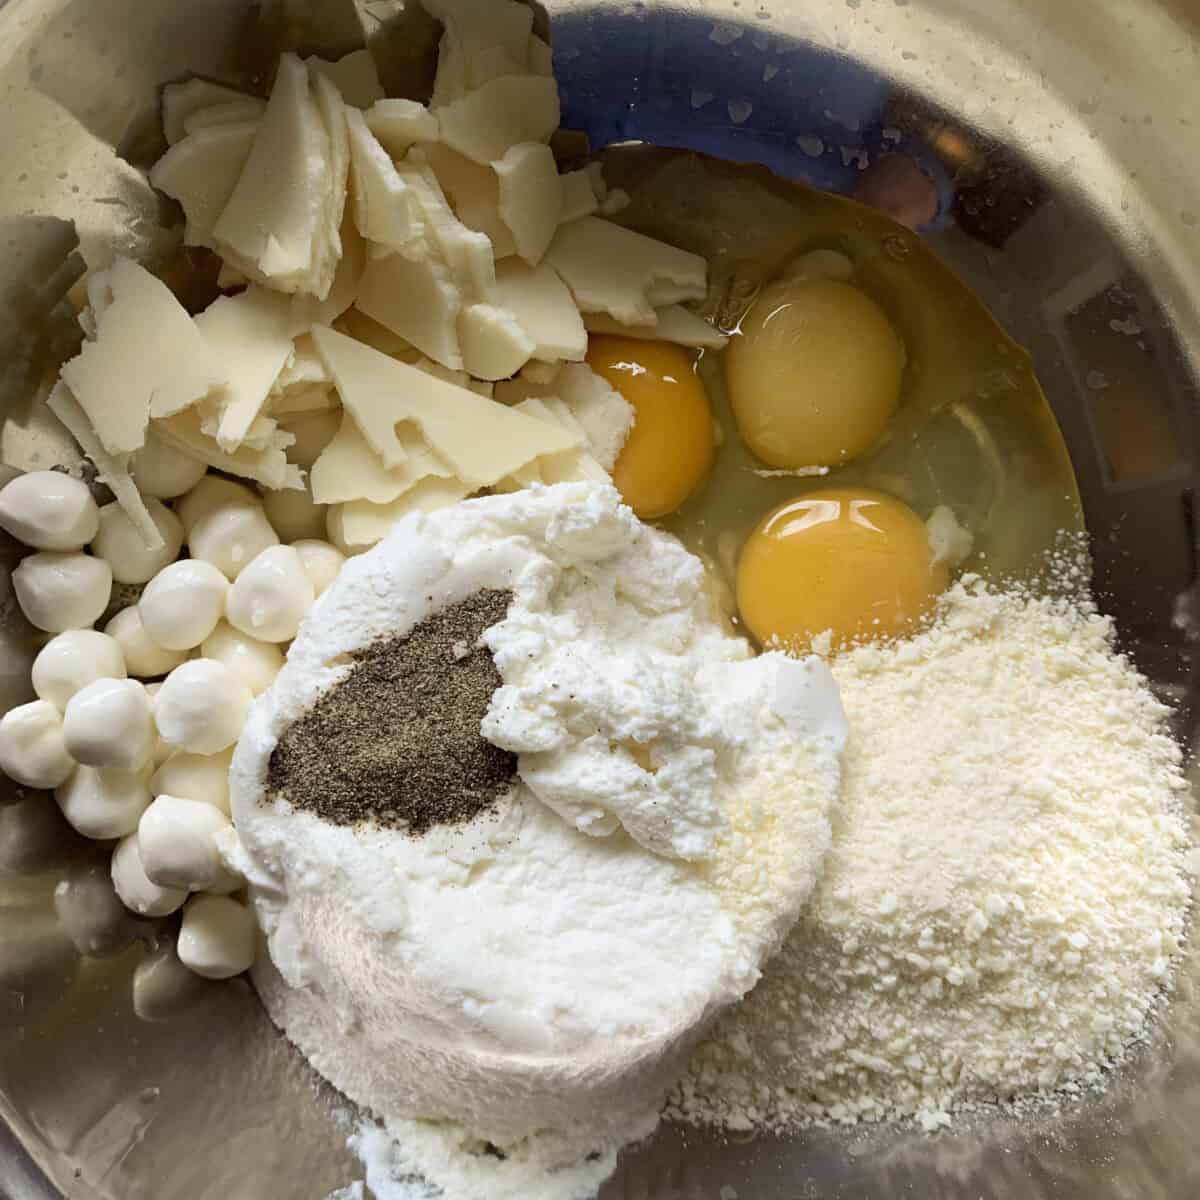 Ingredients for cheese mixture in silver bowl